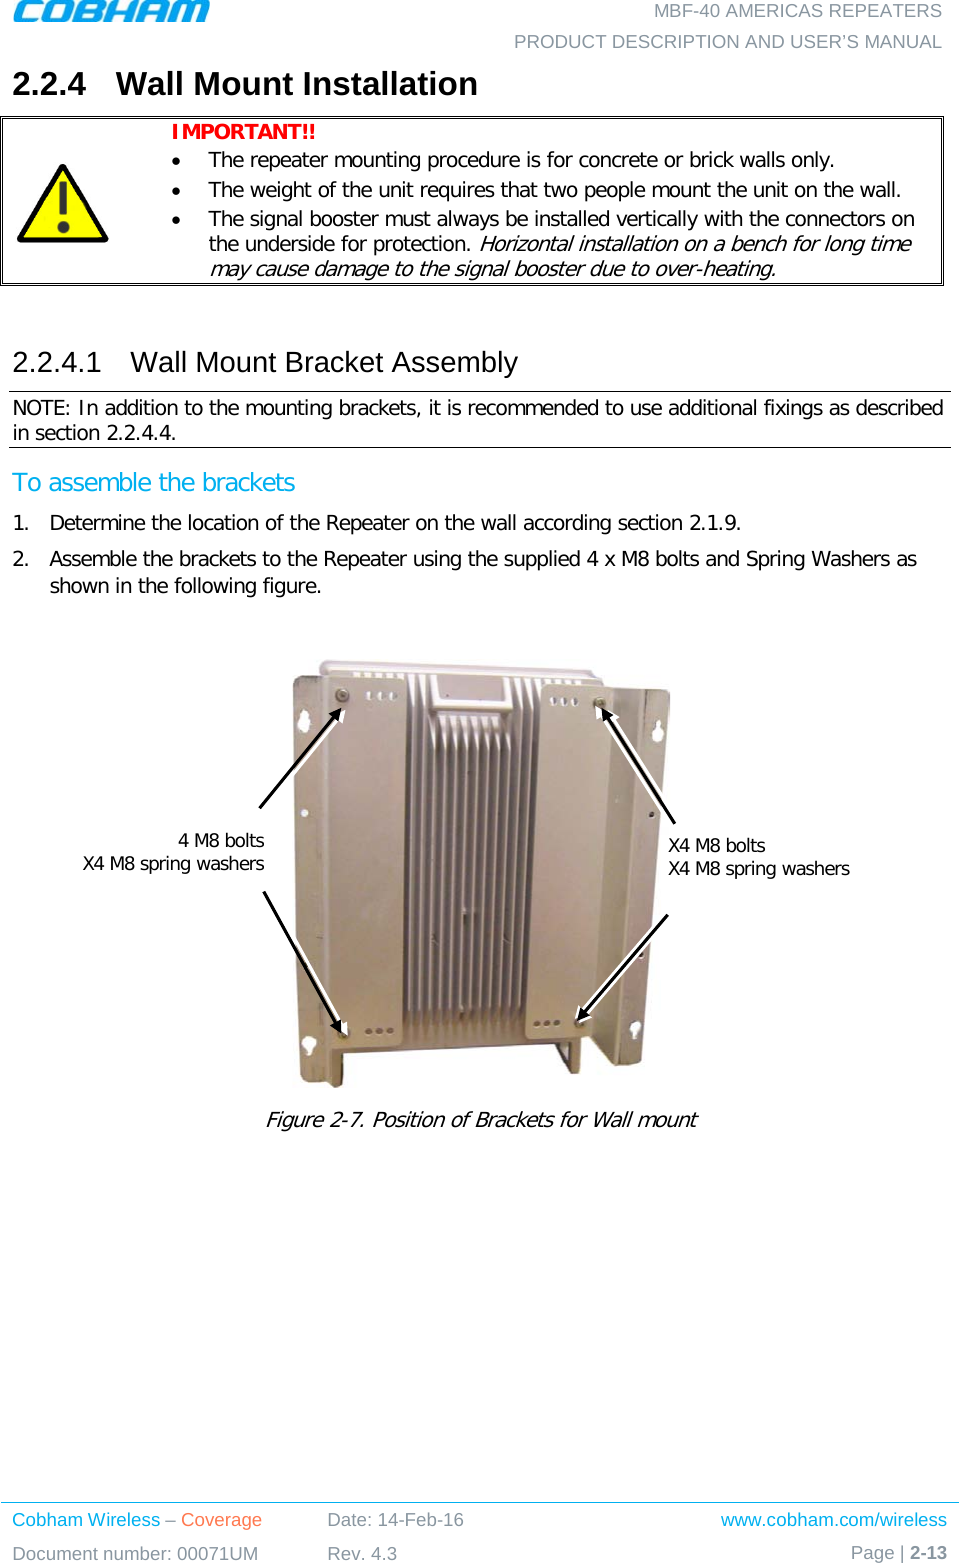   MBF-40 AMERICAS REPEATERS PRODUCT DESCRIPTION AND USER’S MANUAL Cobham Wireless – Coverage Date: 14-Feb-16 www.cobham.com/wireless Document number: 00071UM Rev. 4.3 Page | 2-13  2.2.4  Wall Mount Installation  IMPORTANT!!  • The repeater mounting procedure is for concrete or brick walls only.  • The weight of the unit requires that two people mount the unit on the wall. • The signal booster must always be installed vertically with the connectors on the underside for protection. Horizontal installation on a bench for long time may cause damage to the signal booster due to over-heating.  2.2.4.1  Wall Mount Bracket Assembly NOTE: In addition to the mounting brackets, it is recommended to use additional fixings as described in section  2.2.4.4.  To assemble the brackets 1.  Determine the location of the Repeater on the wall according section  2.1.9. 2.  Assemble the brackets to the Repeater using the supplied 4 x M8 bolts and Spring Washers as shown in the following figure.   Figure  2-7. Position of Brackets for Wall mount X4 M8 bolts X4 M8 spring washers  4 M8 bolts X4 M8 spring washers  